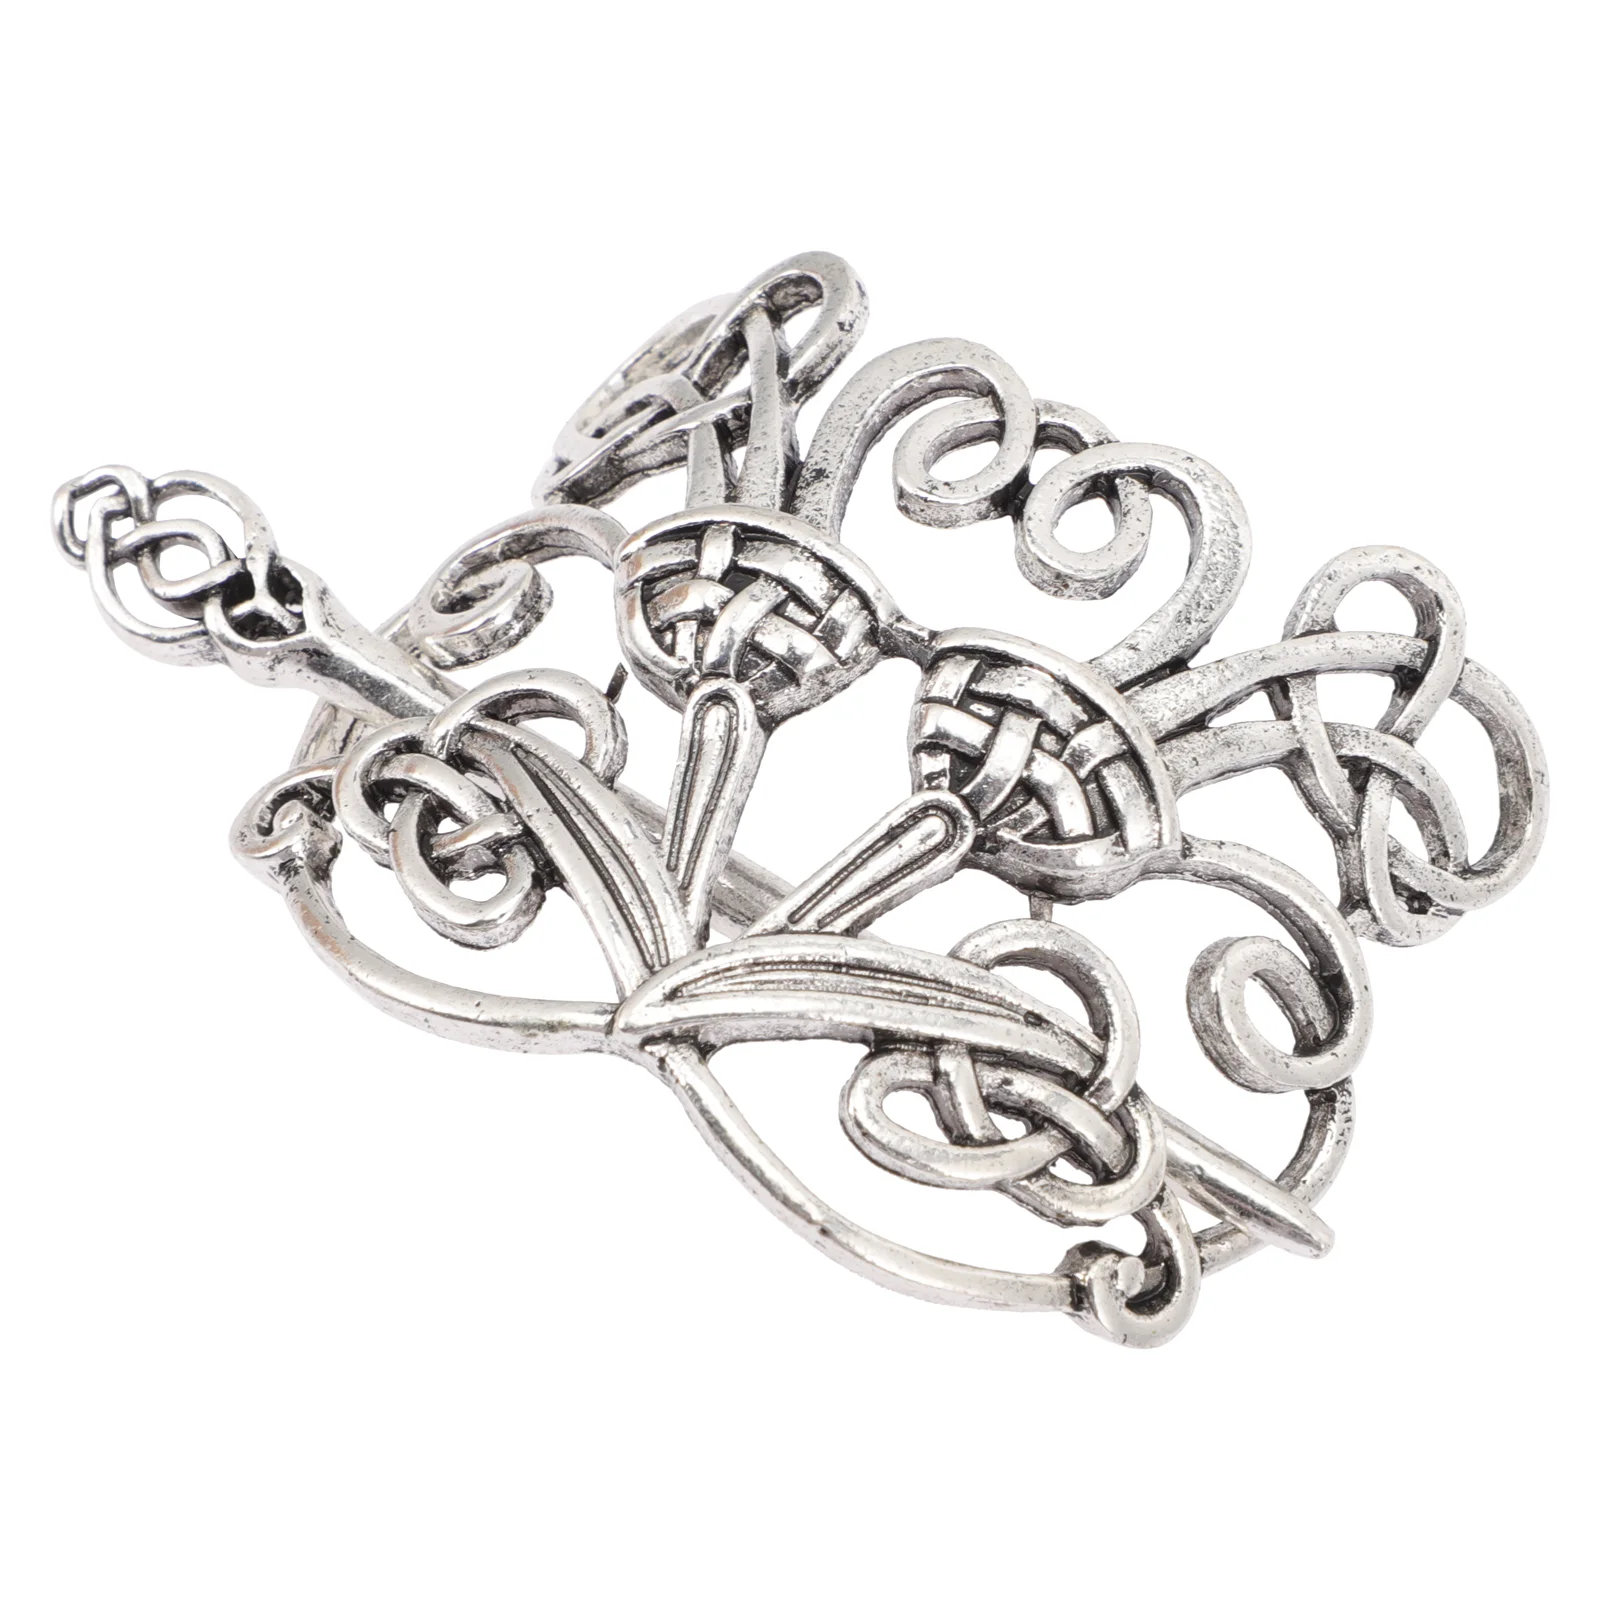 

Girls Hair Clips Vintage Viking Hairpins Metal Barrette Cuff Celtic Knot Accessories Alloy Women's